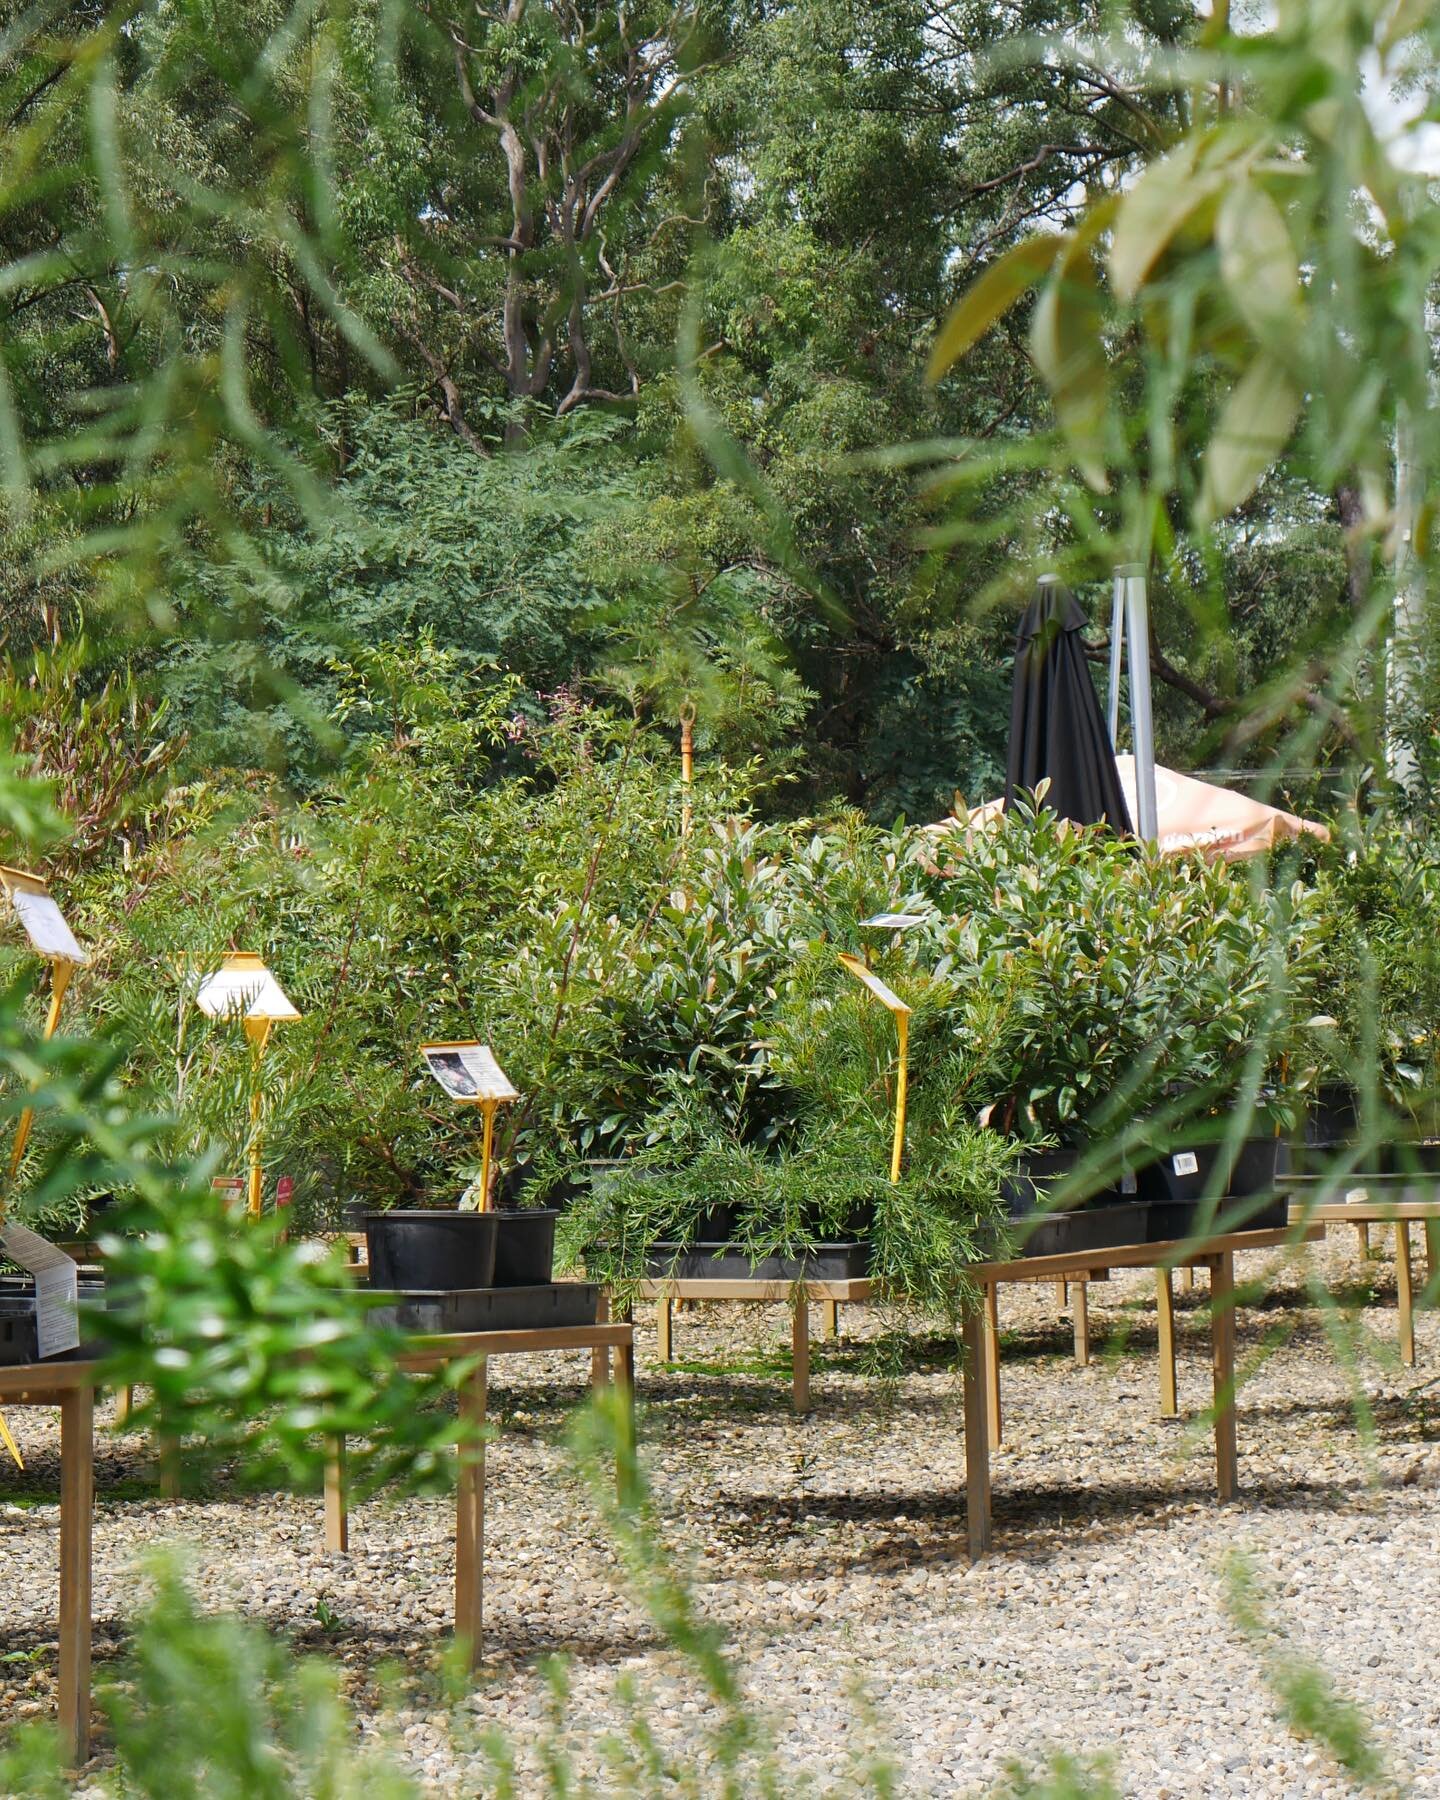 🥑🫒 FRUIT TREES HAVE ARRIVED 🍊🍋

We&rsquo;ve had a recent delivery of fruit trees that are looking fantastic and are ready for their forever homes! Species include the following:
- Hass Avocado
- Reed Avocado
- Shepard Avocado
- Tahitian Lime
- Ch